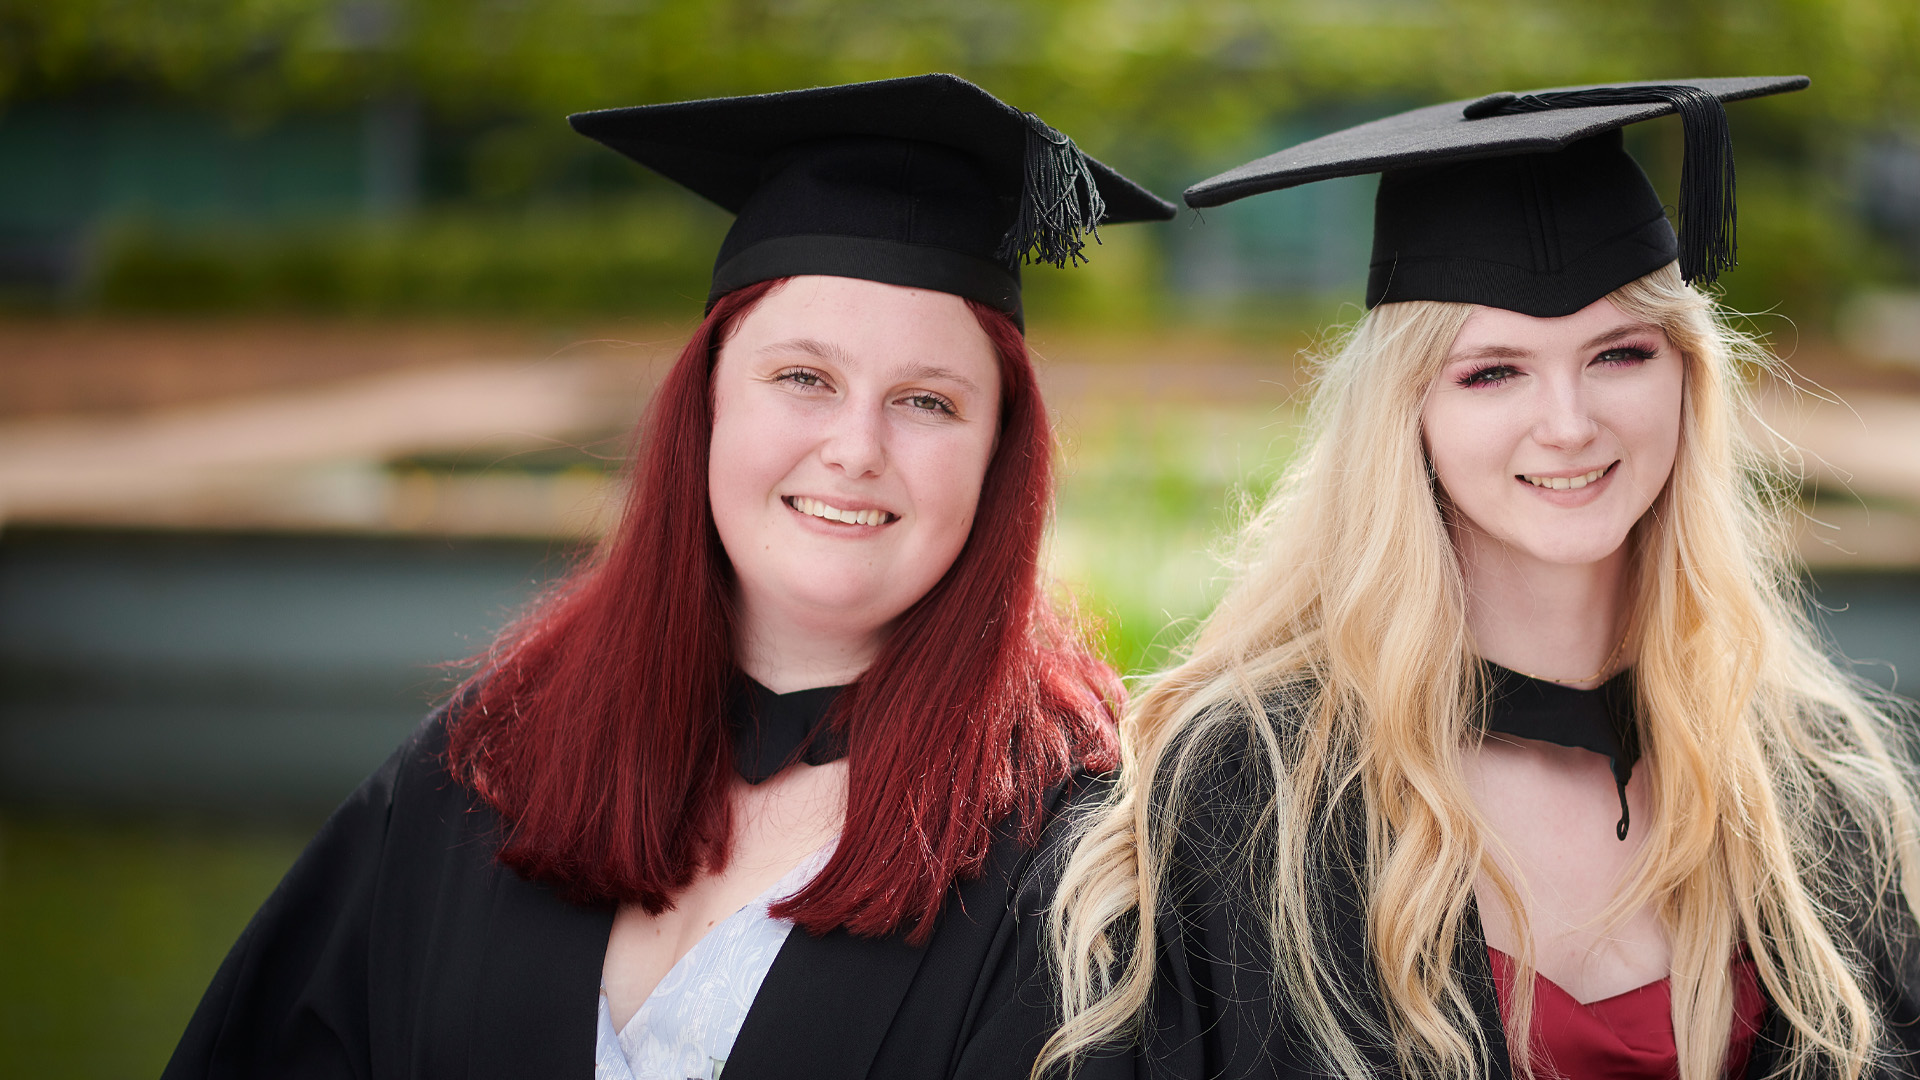 Becca Martlow and Niamh Hastings wearing caps and gowns and smiling